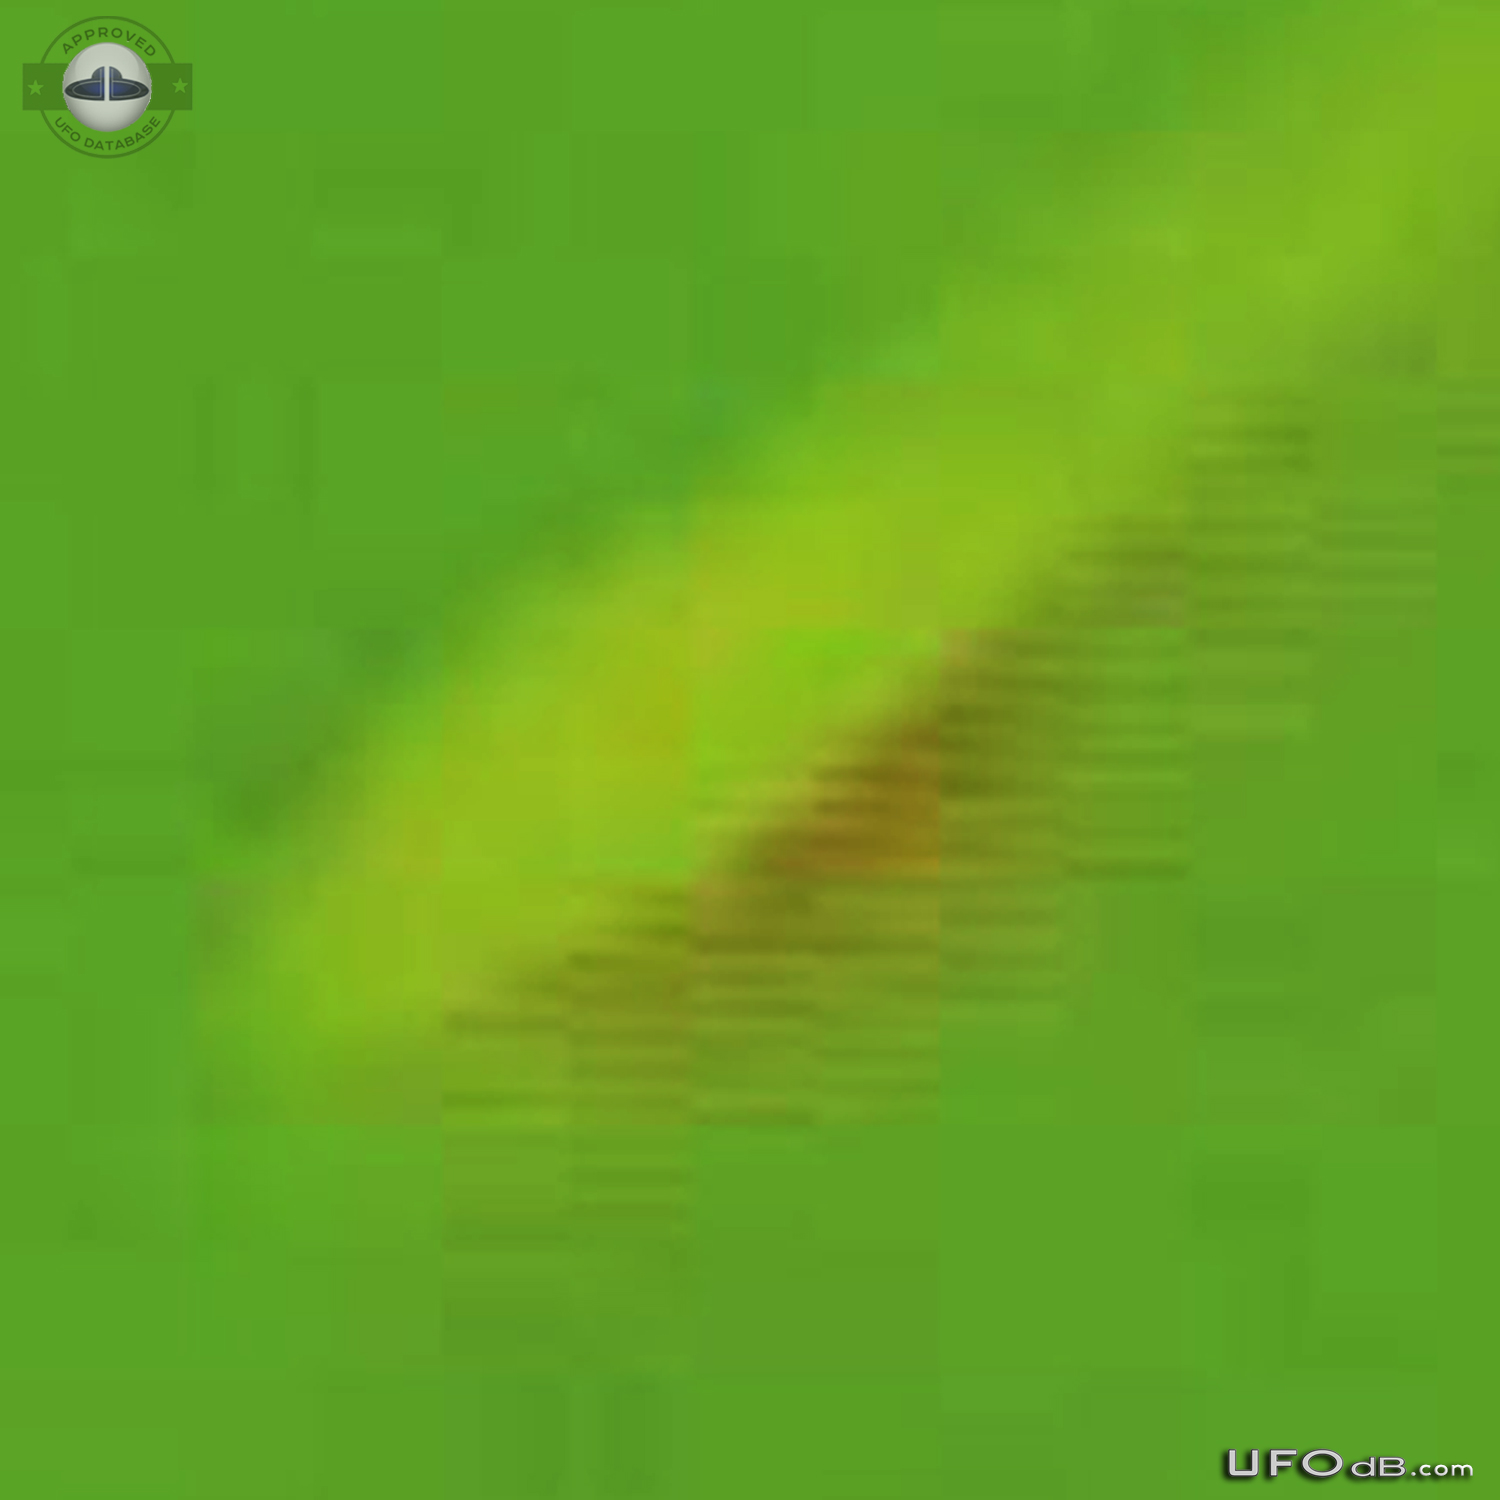 Elder man UFO sighting over Beijing China in February 10 to 27 2003 UFO Picture #615-4